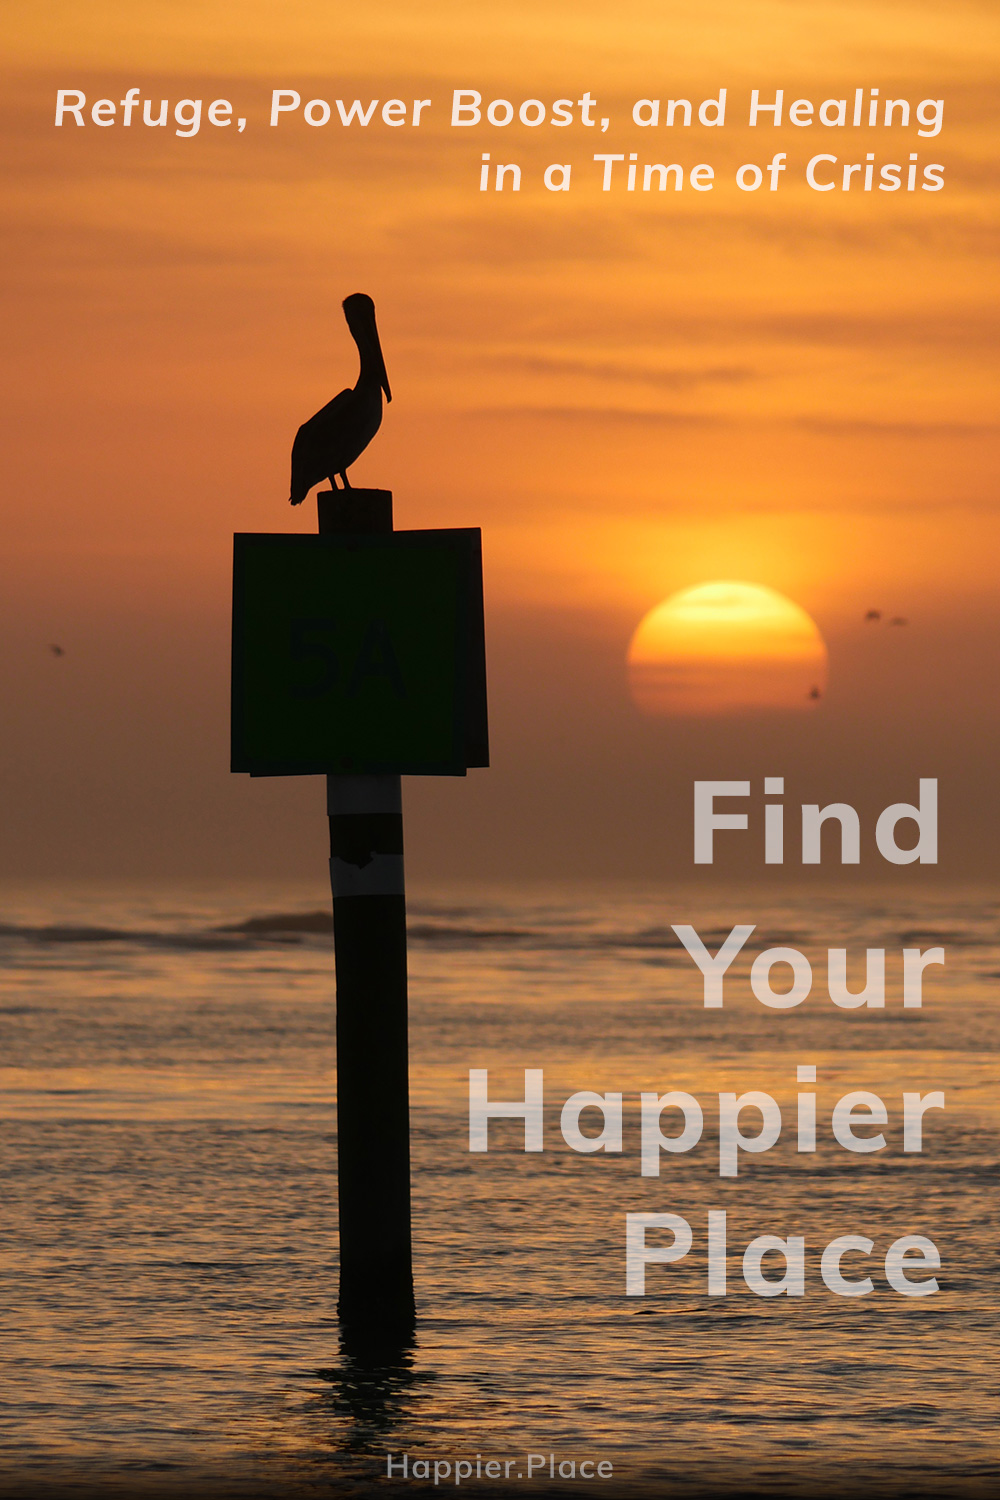 happier healthier tips: find your happier place for refuge, power boost and healing in a time of crisis